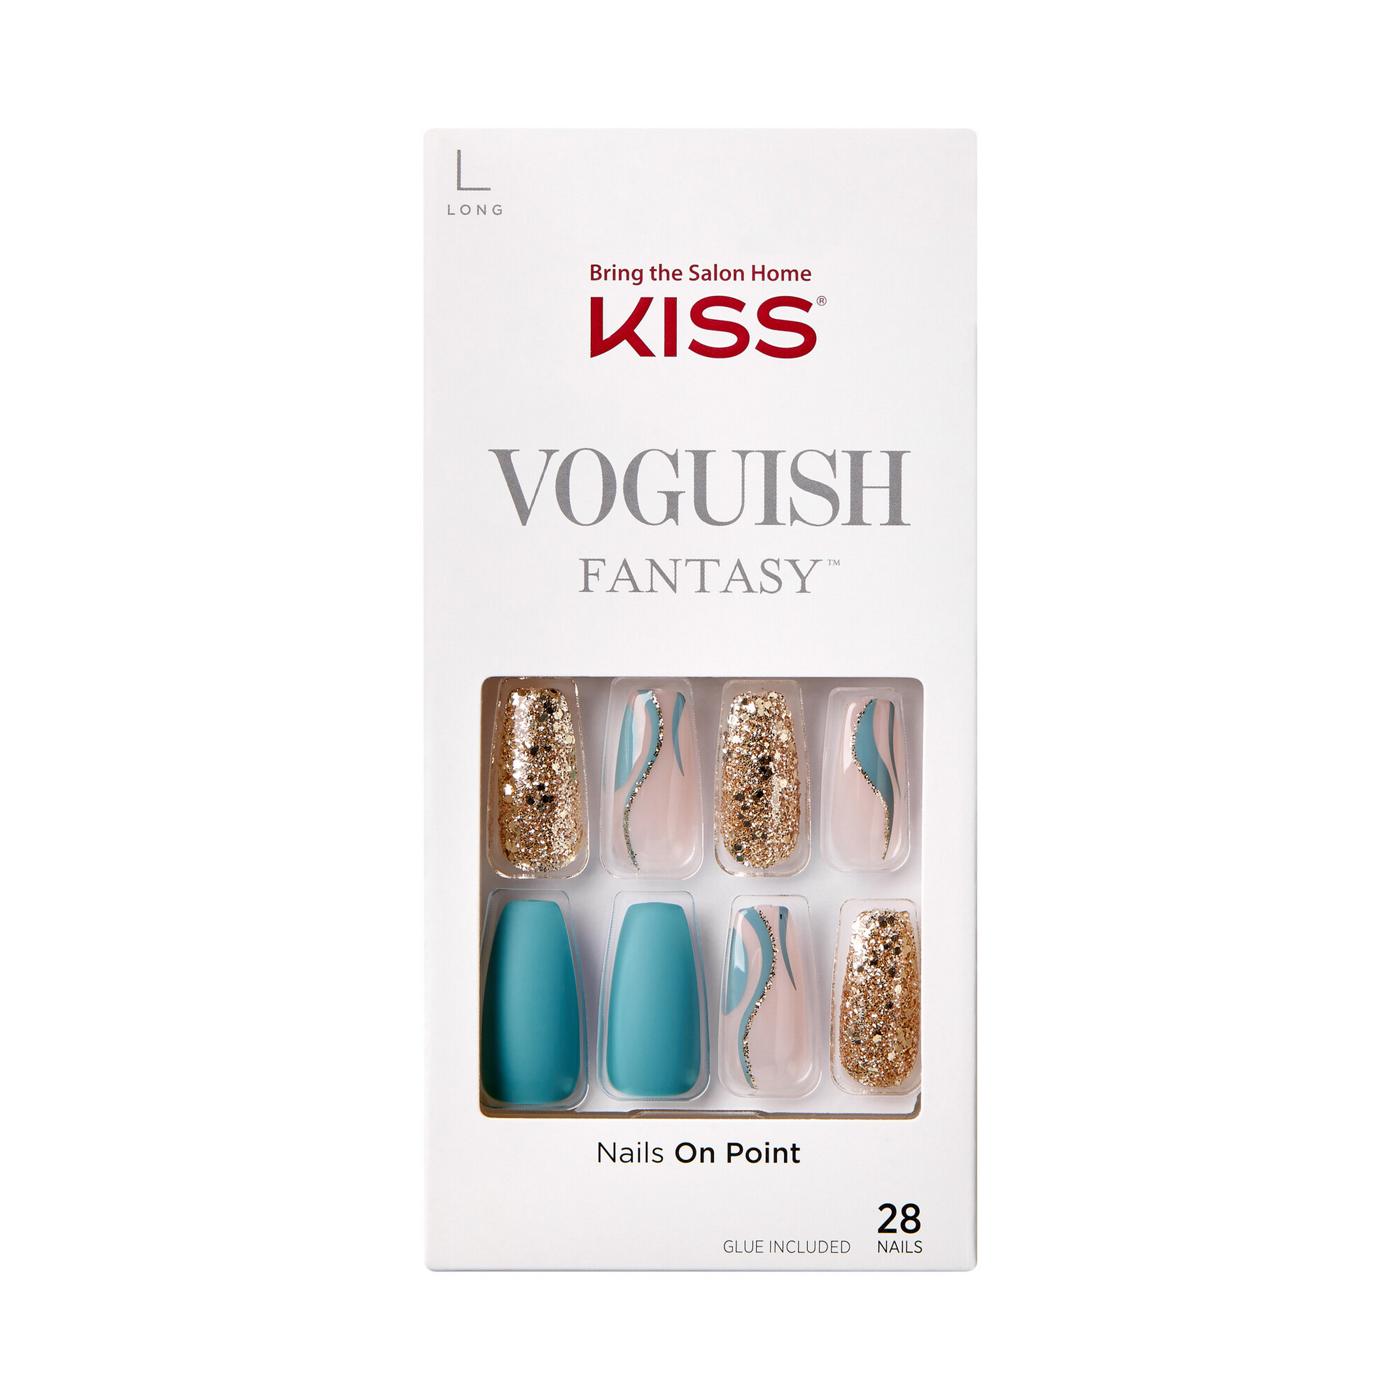 KISS Voguish Fantasy Ready-To-Wear Nails - Style Hunter; image 1 of 7